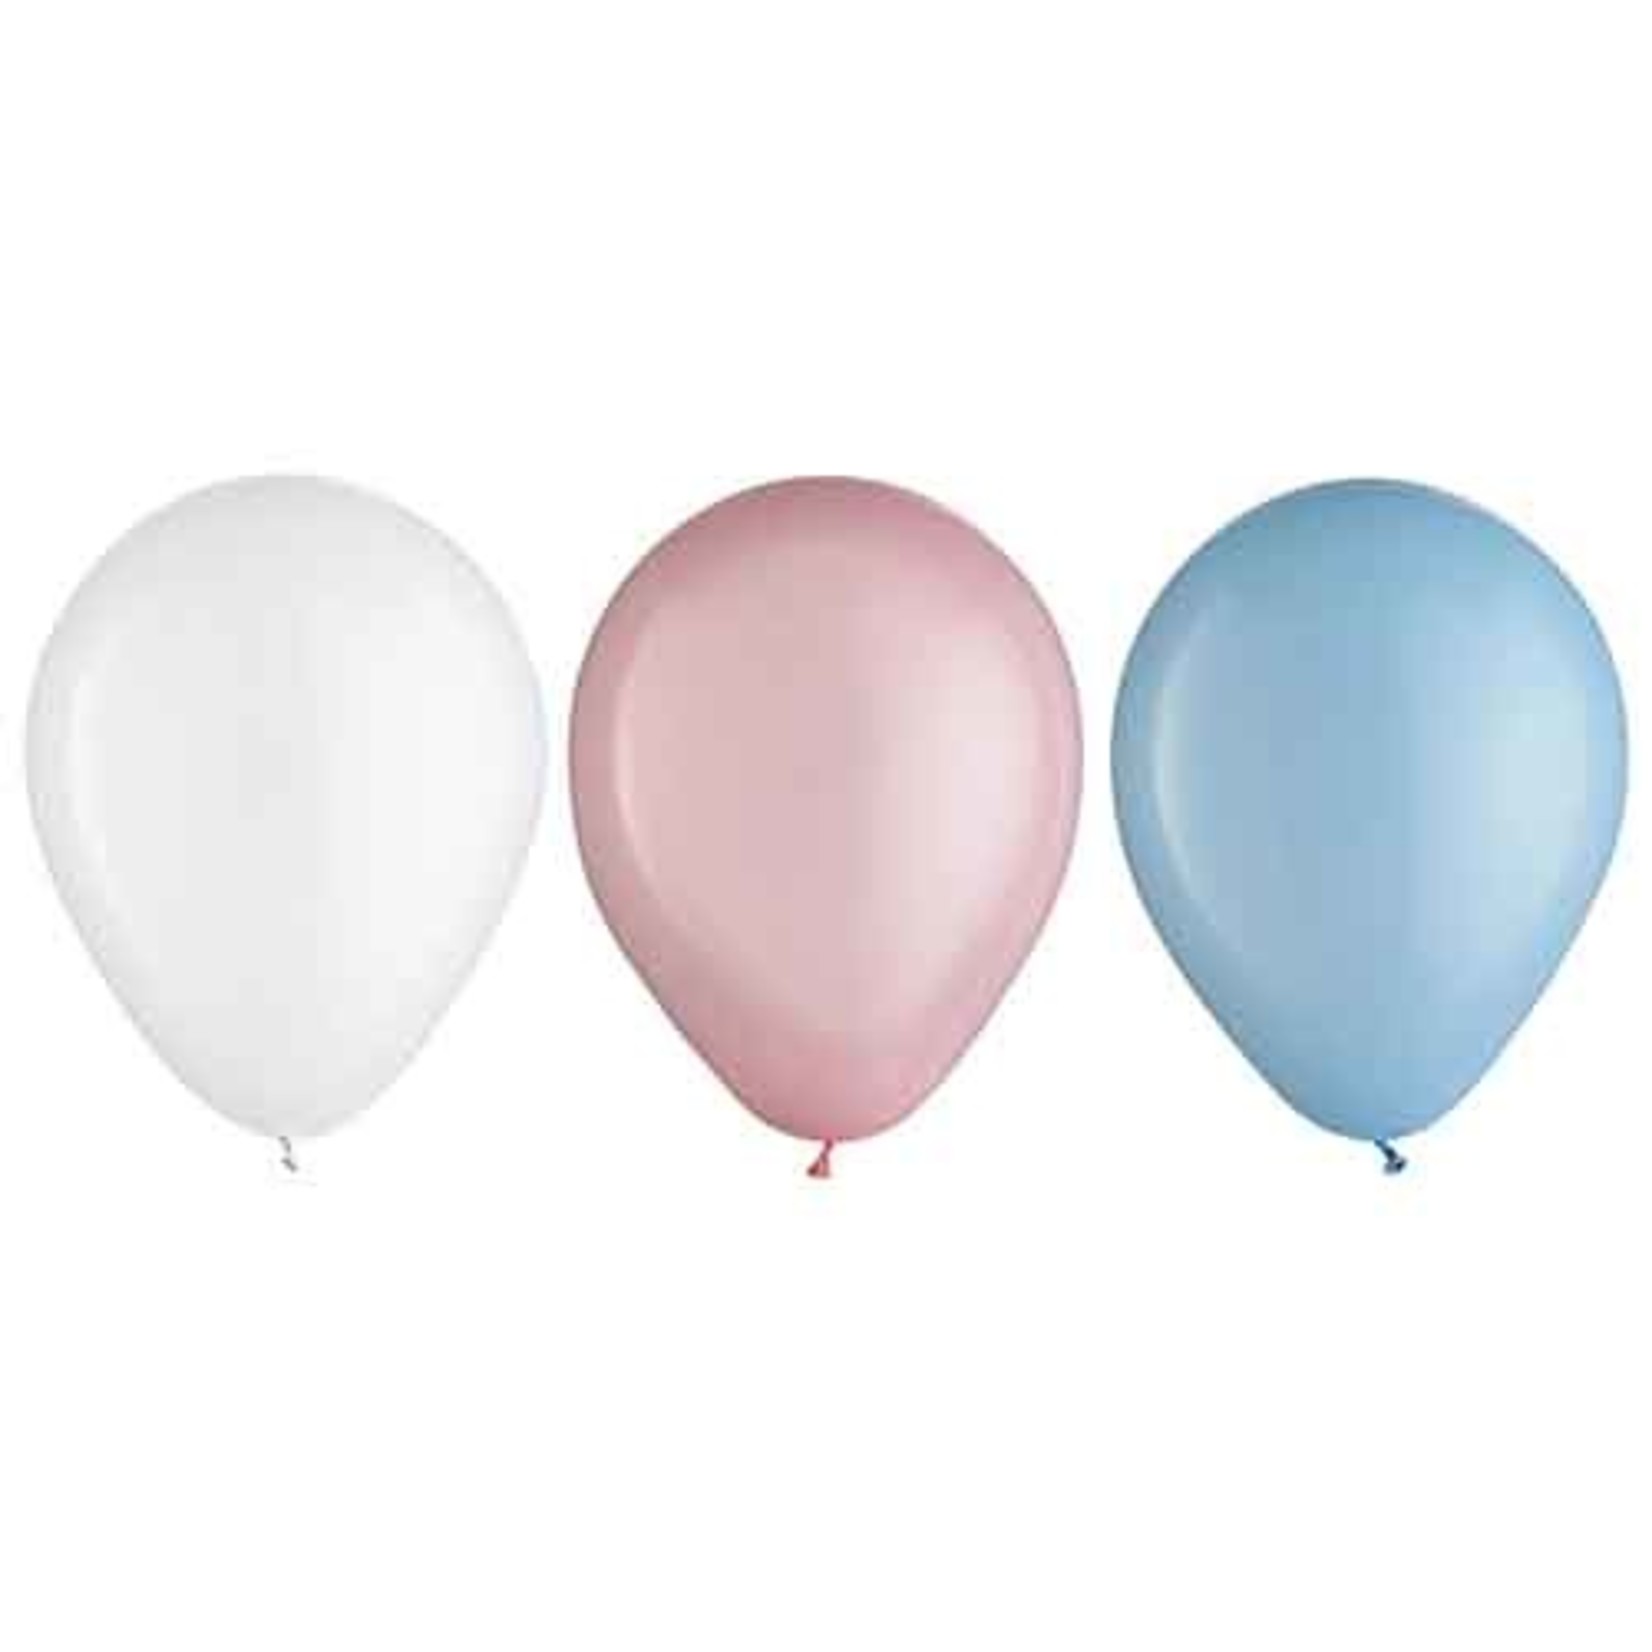 Amscan 11" Gender Reveal Color Mix Latex Balloon Assortment - 15ct.